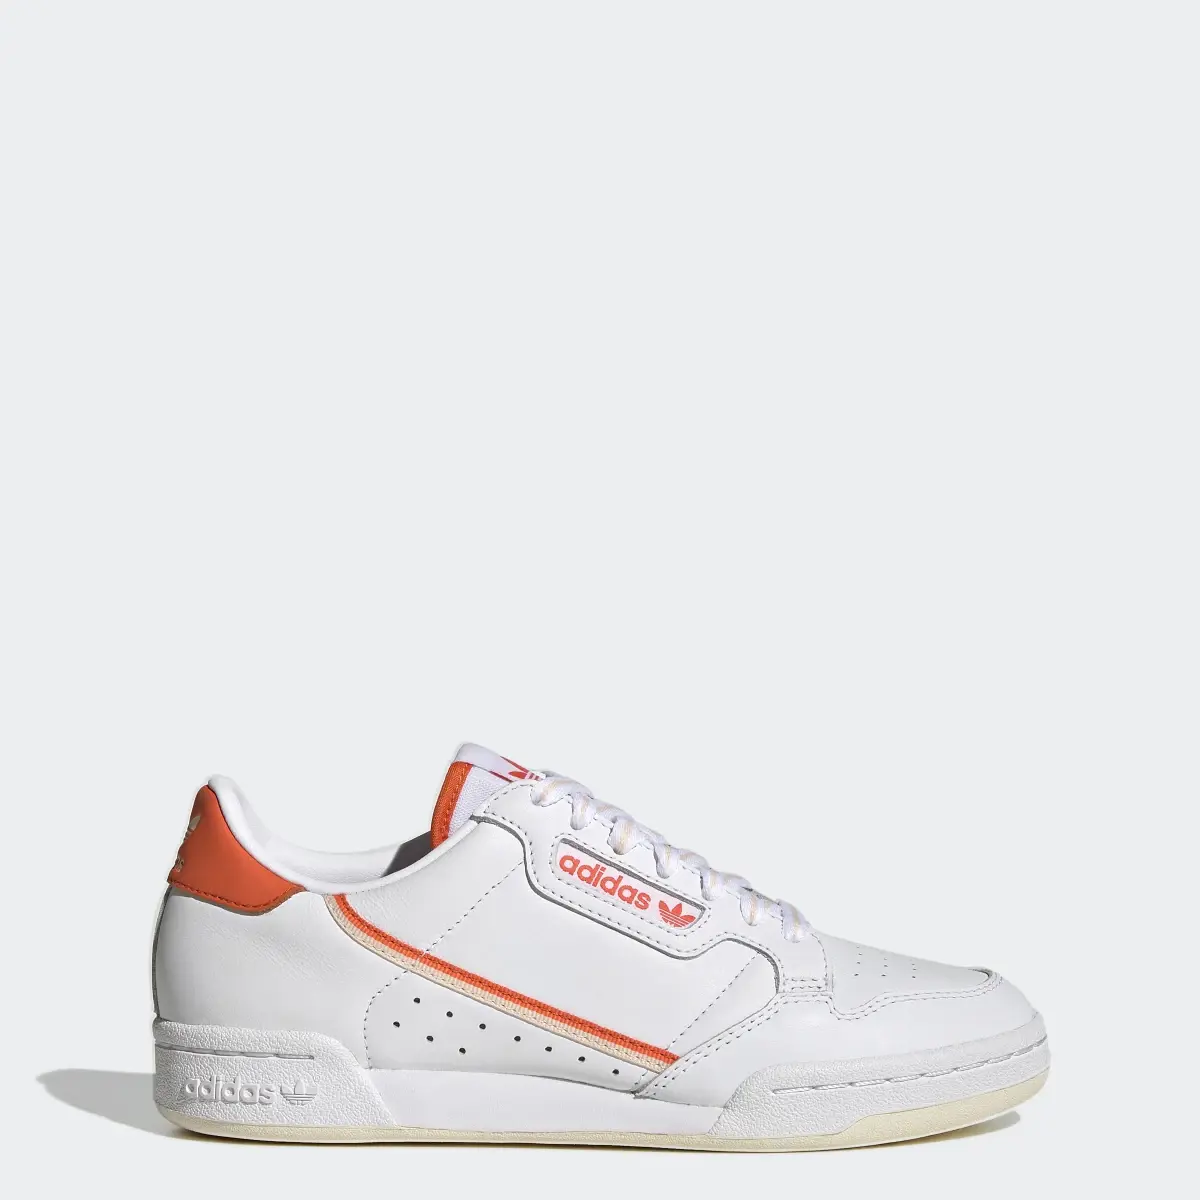 Adidas Continental 80 Shoes. 1